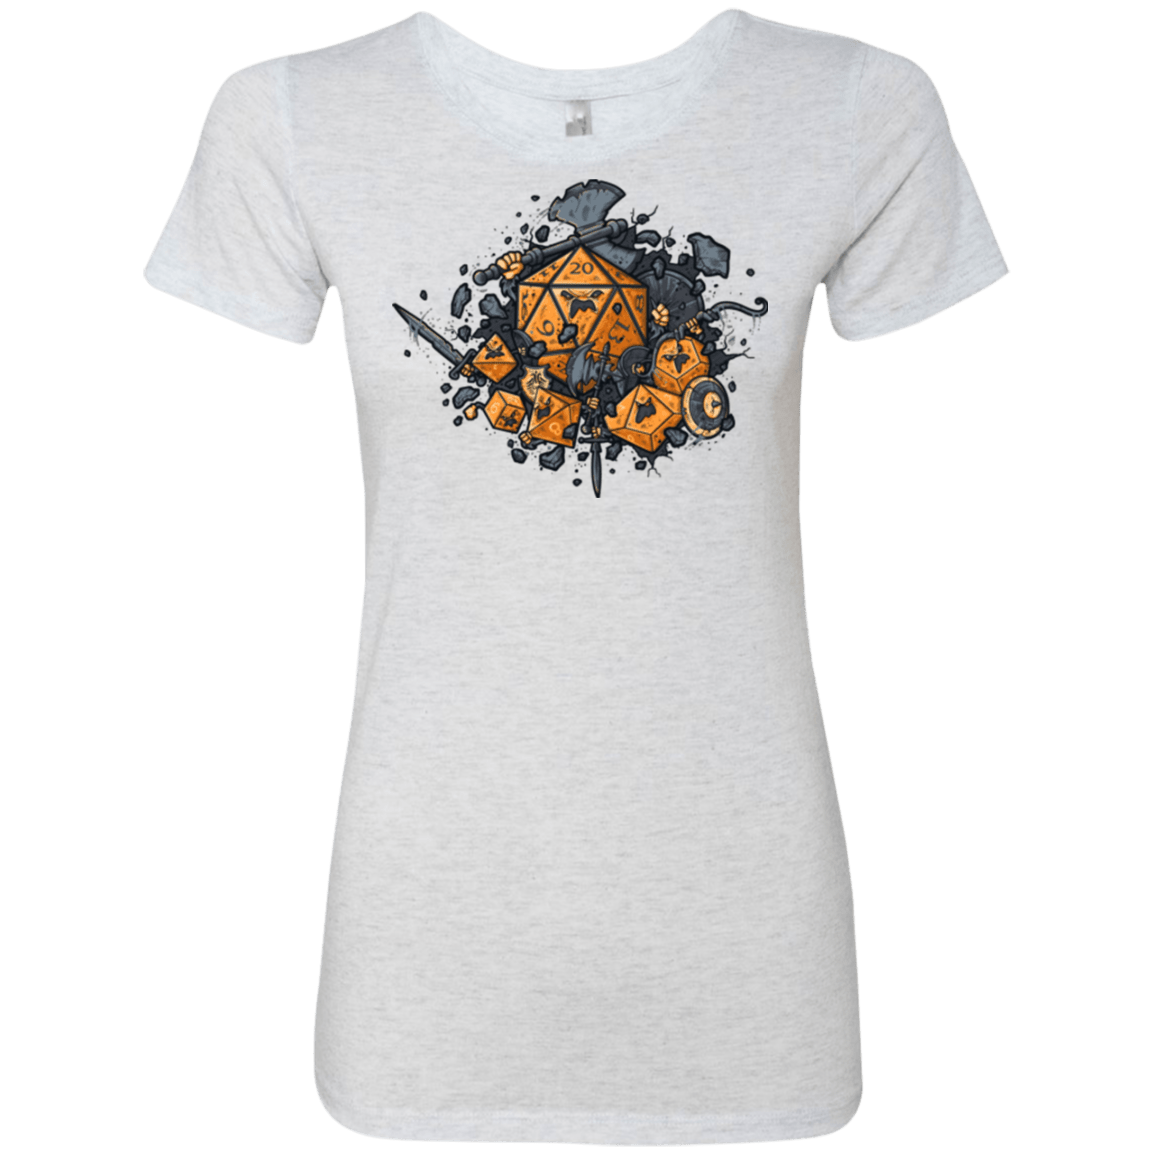 T-Shirts Heather White / Small RPG UNITED Women's Triblend T-Shirt